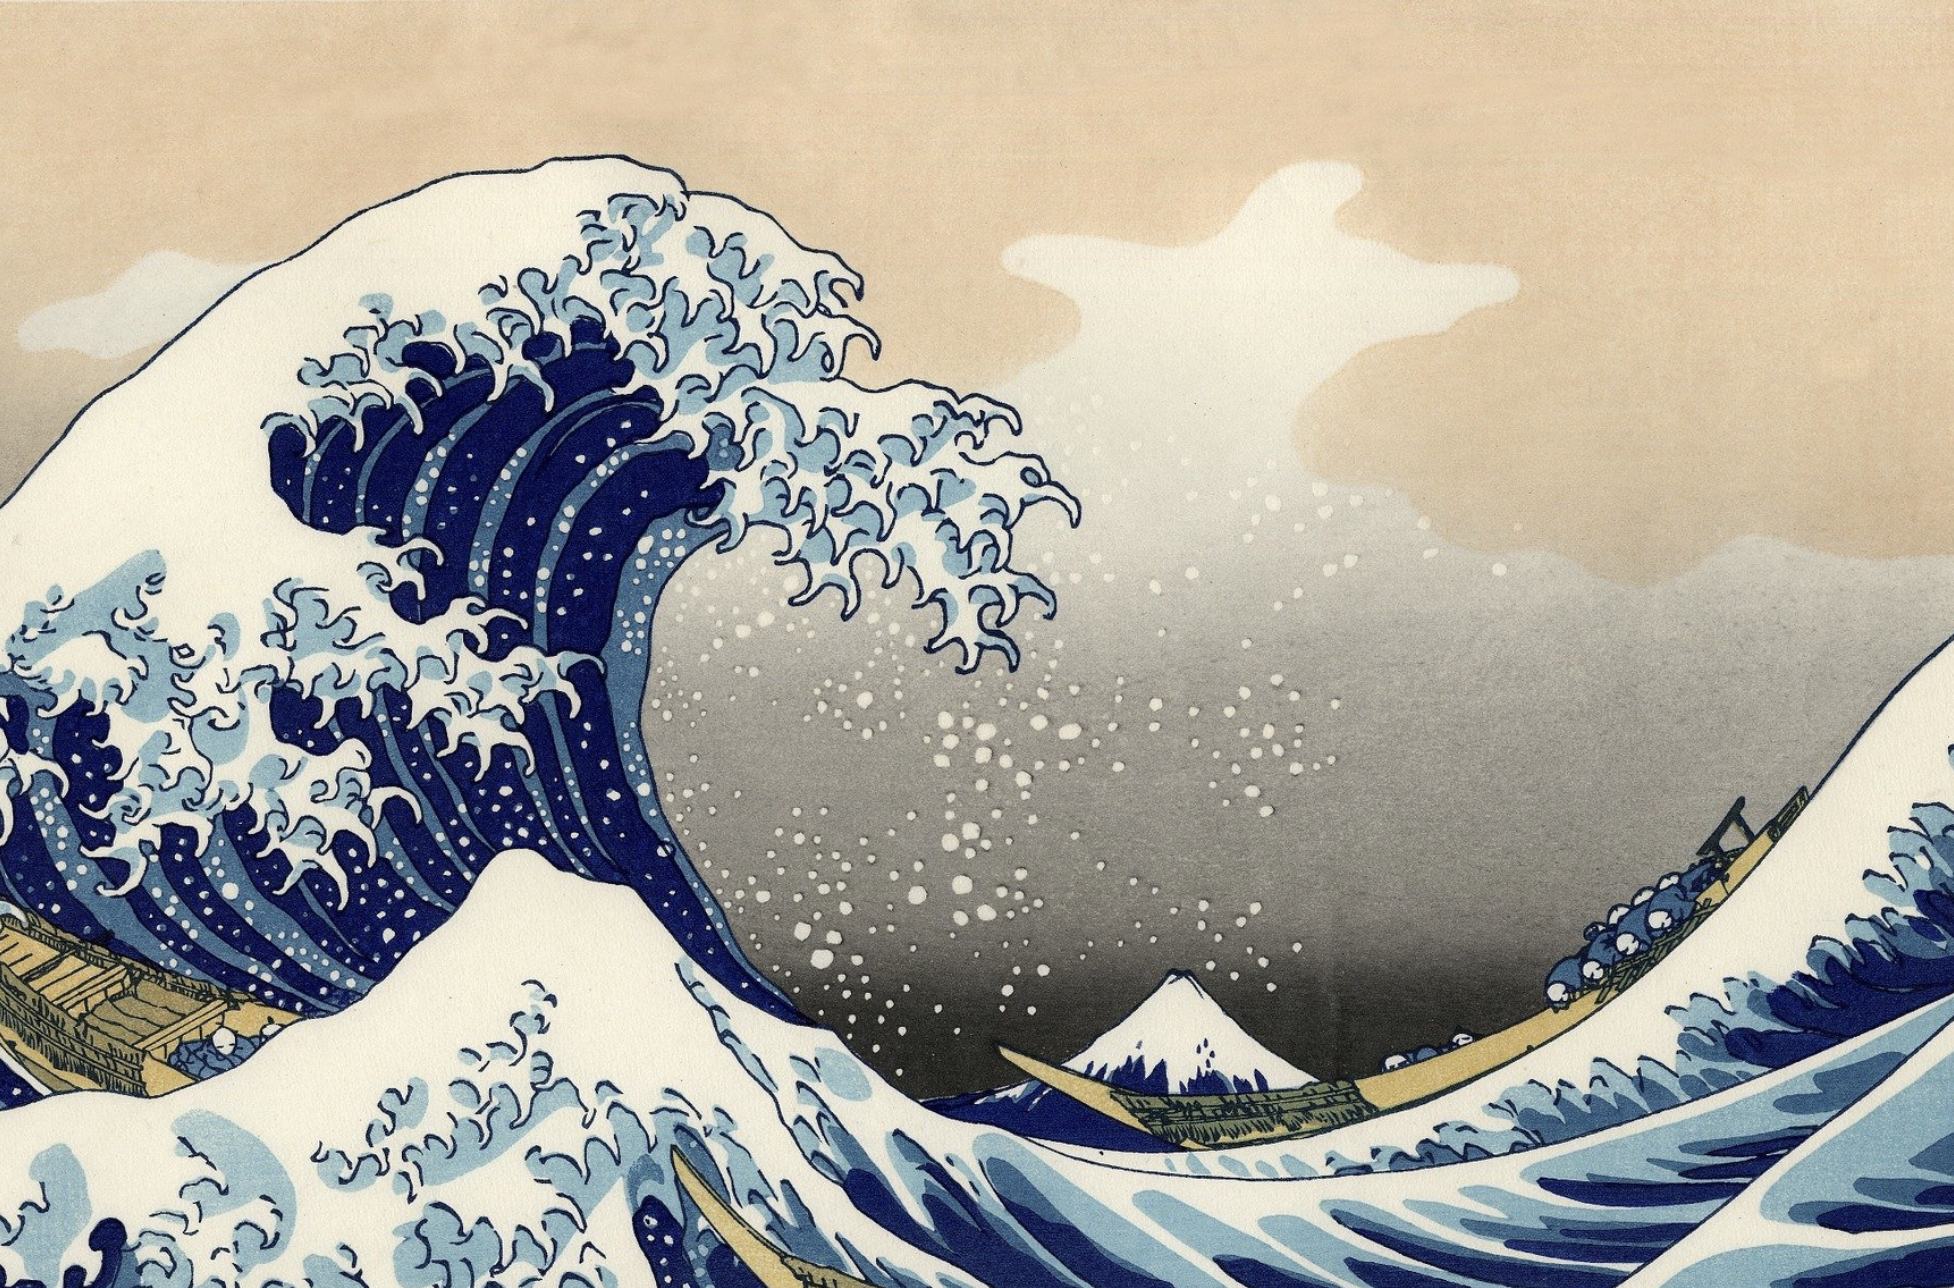 Zoomed image of The Great Wave off Kanagawa by Japanese artist Hokusai.